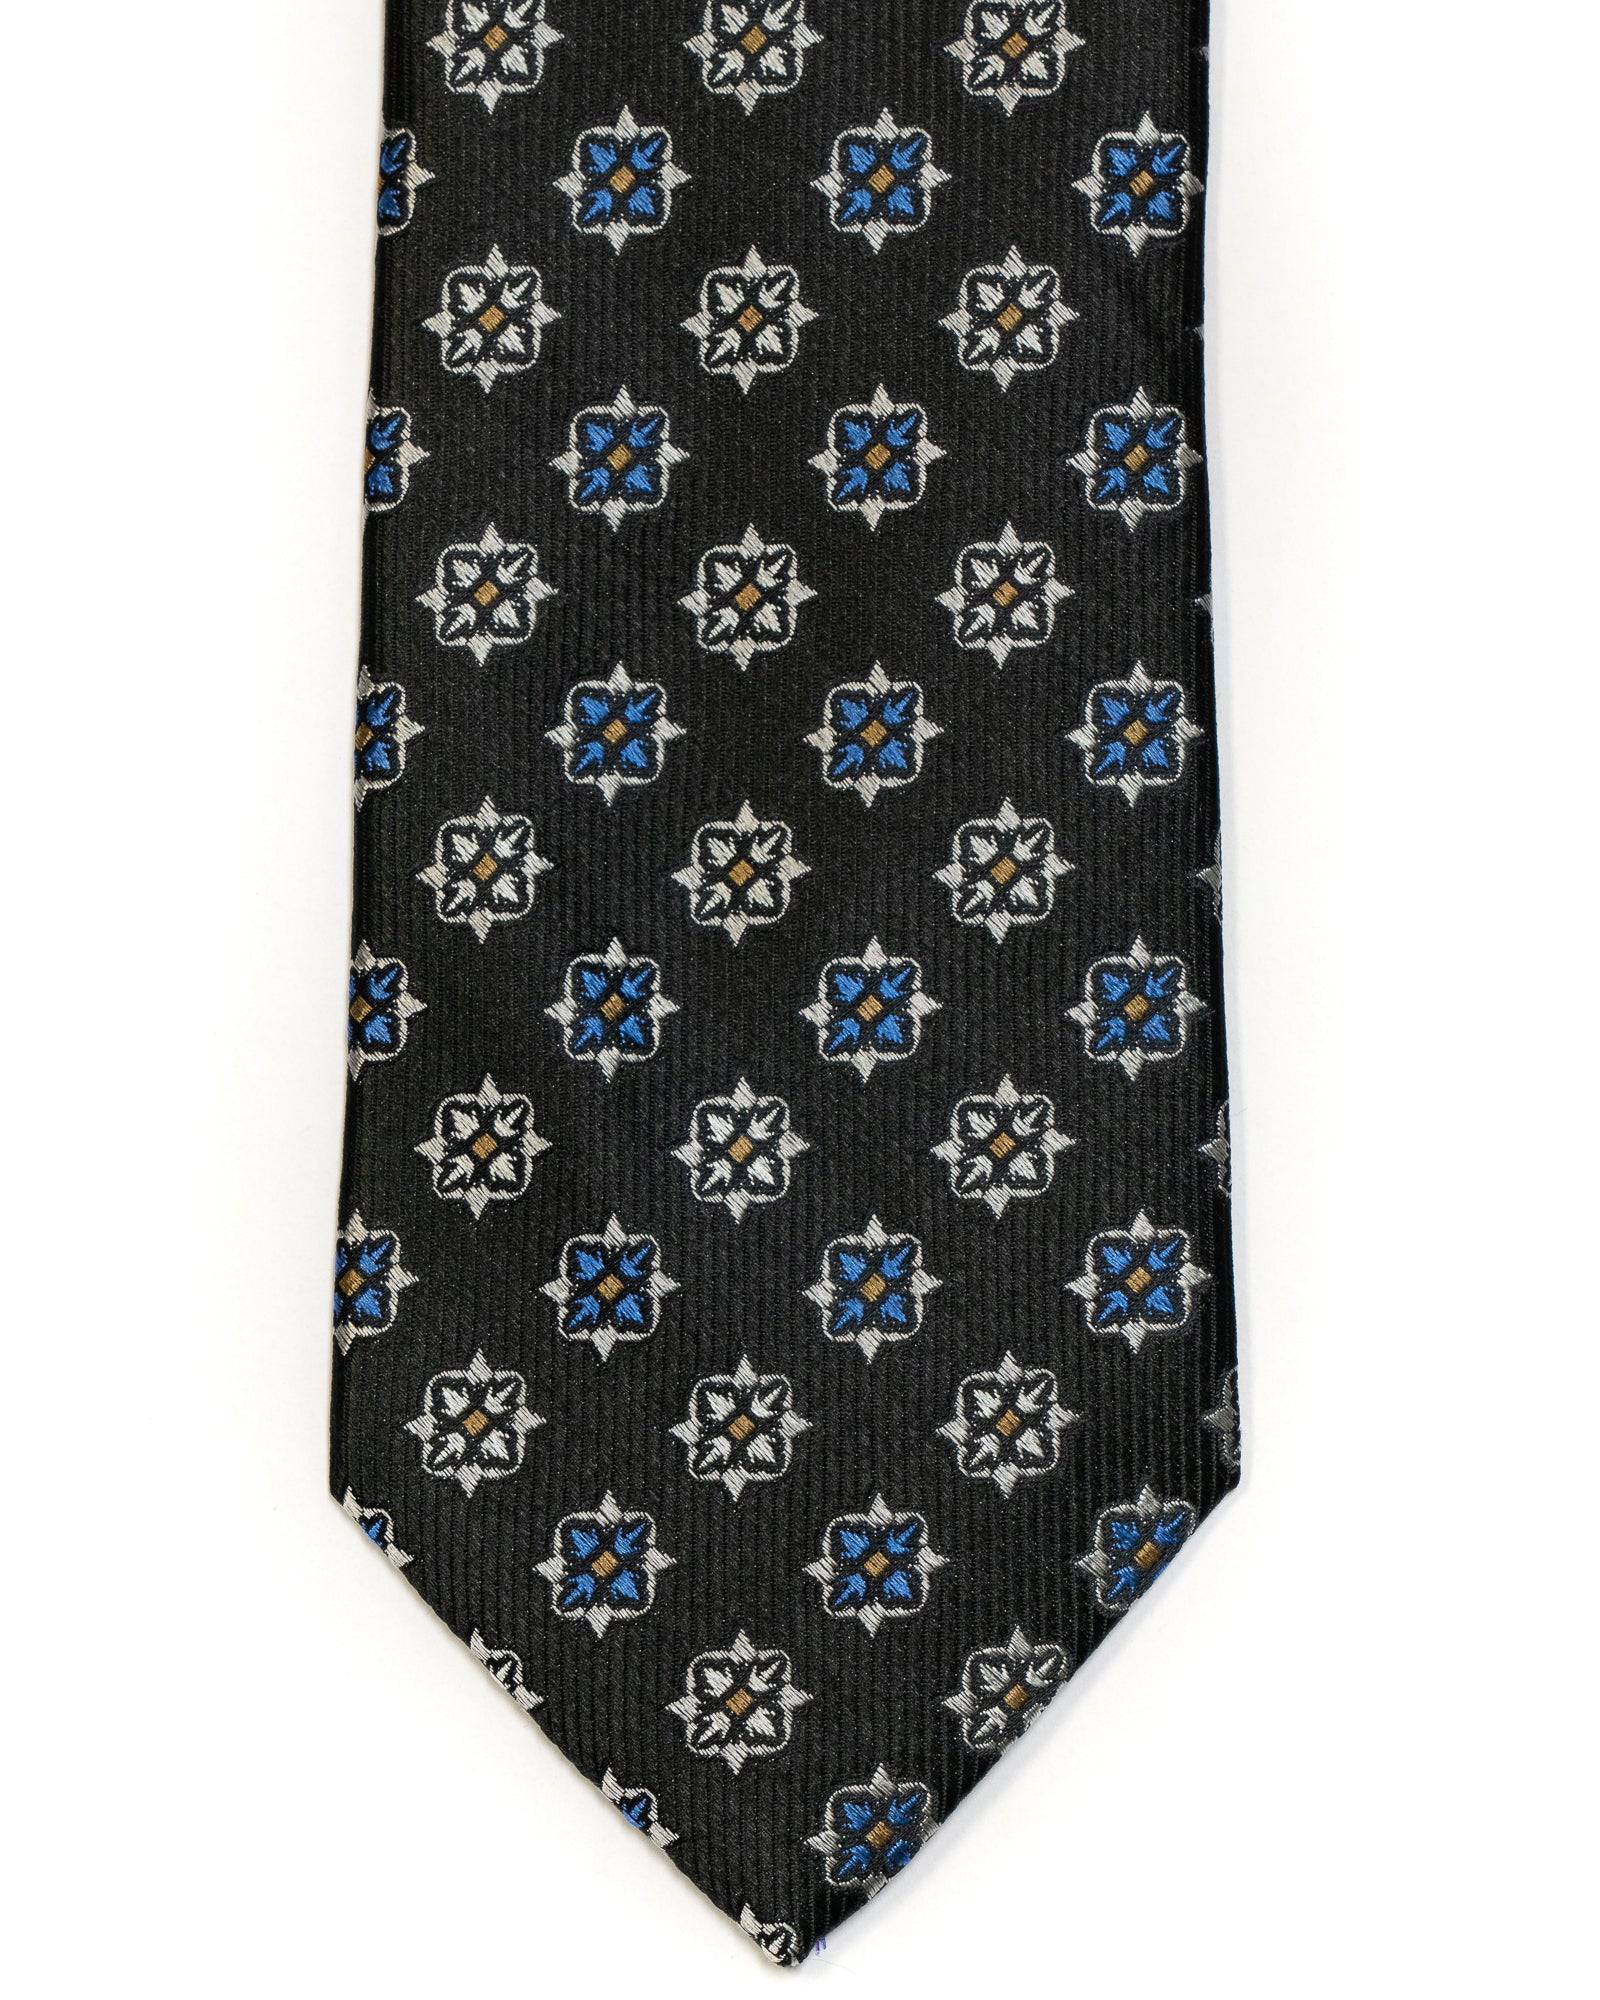 Silk Tie In Black With Blue & Champagne Foulard Design - Rainwater's Men's Clothing and Tuxedo Rental